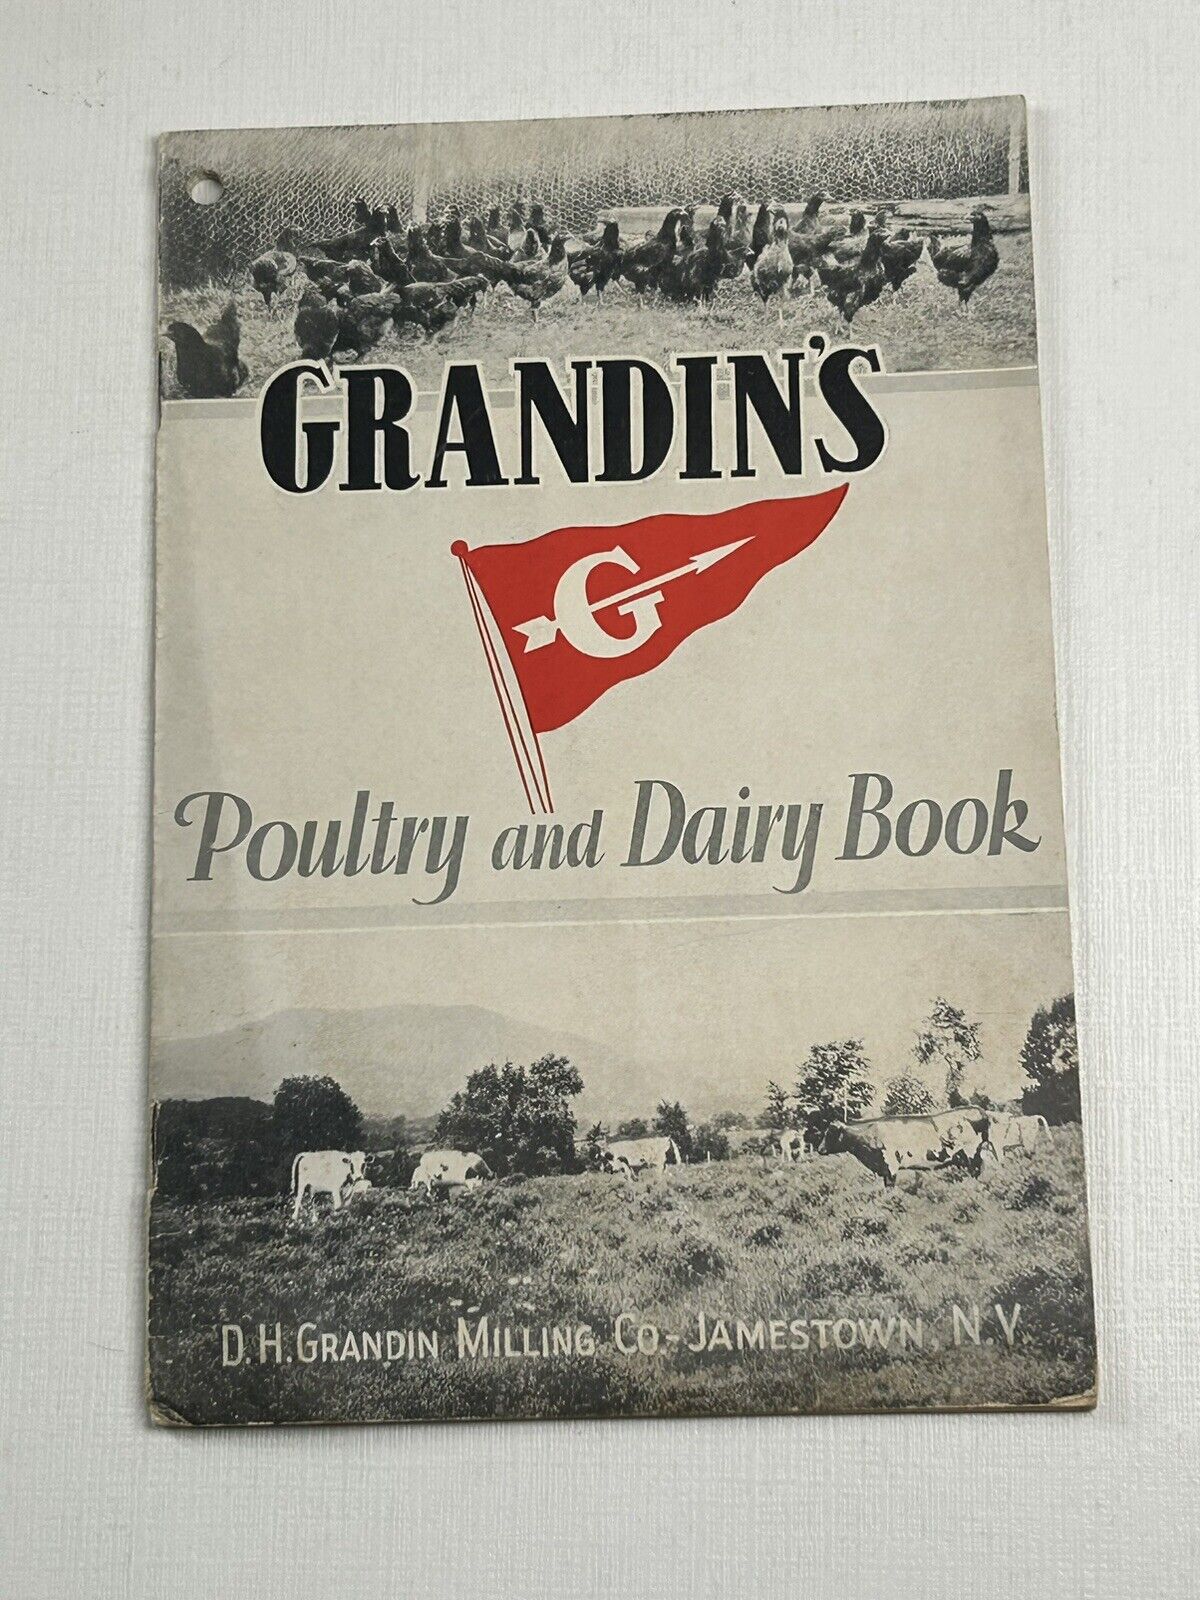 Grandin’s Poultry And Dairy Book 1929 Jamestown NY